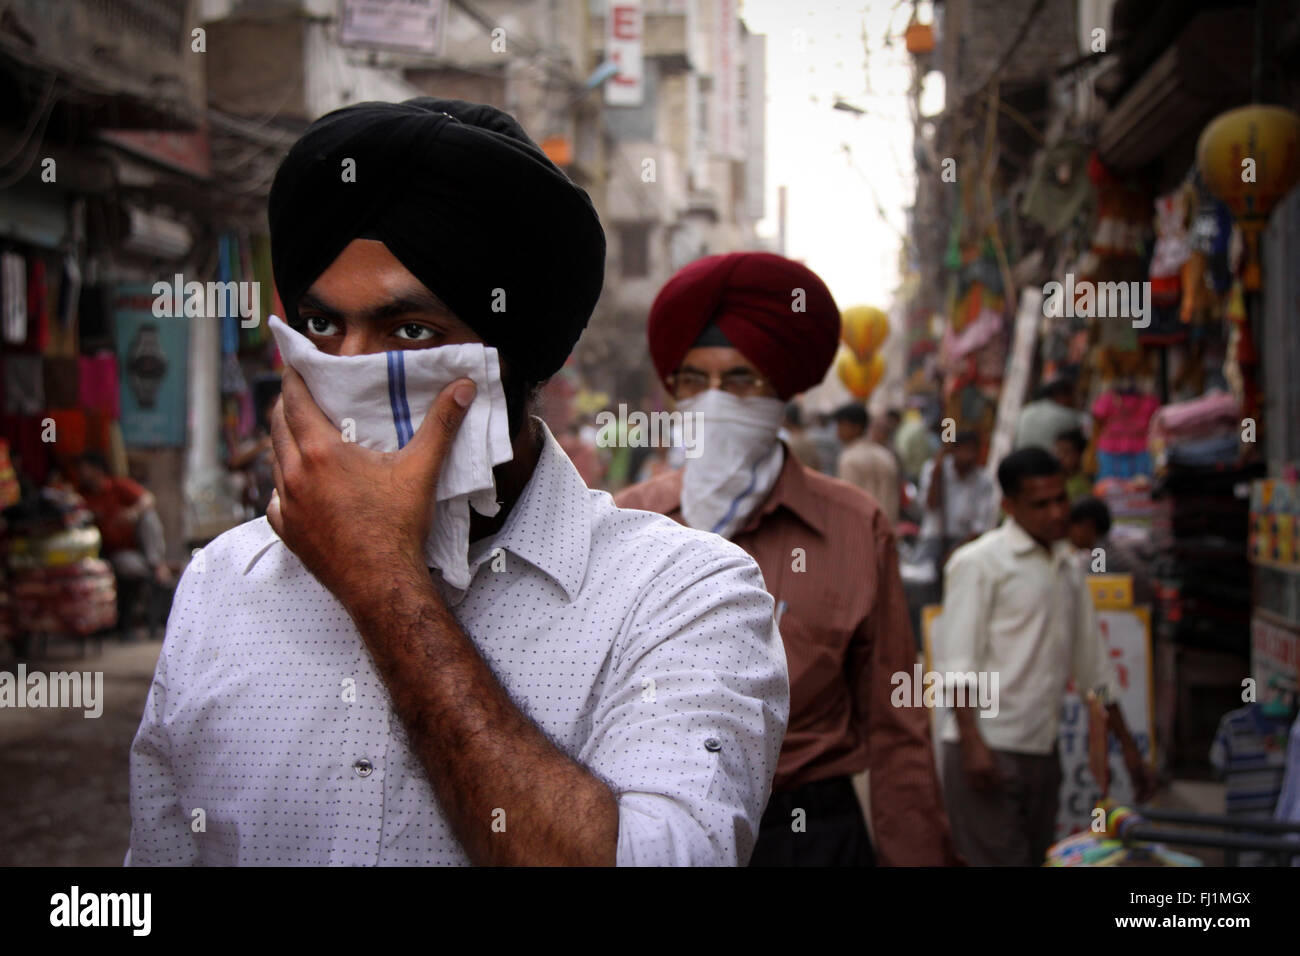 Sikh men walk in a street of New Delhi with turban and covering their faceIndia Stock Photo